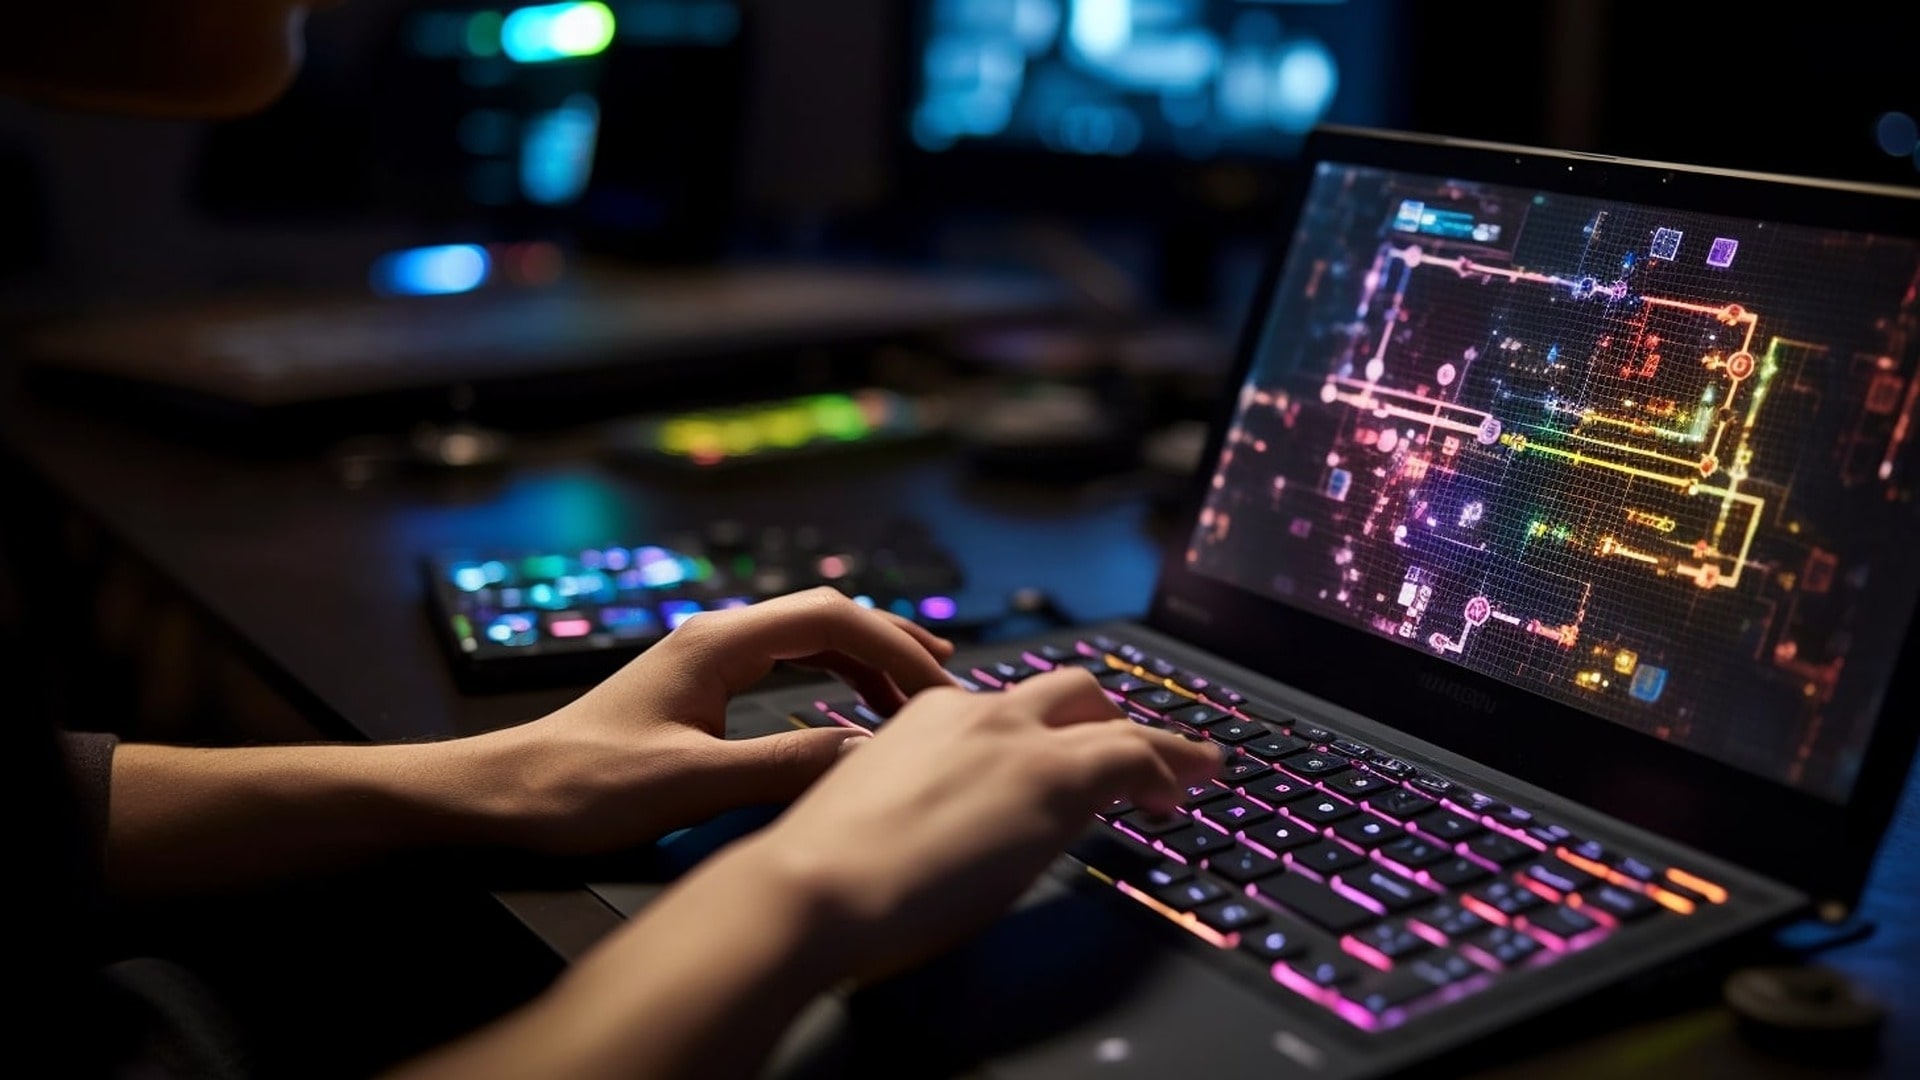 Gamer on a laptop using a cloud gaming service, accompanied by a step-by-step setup guide.